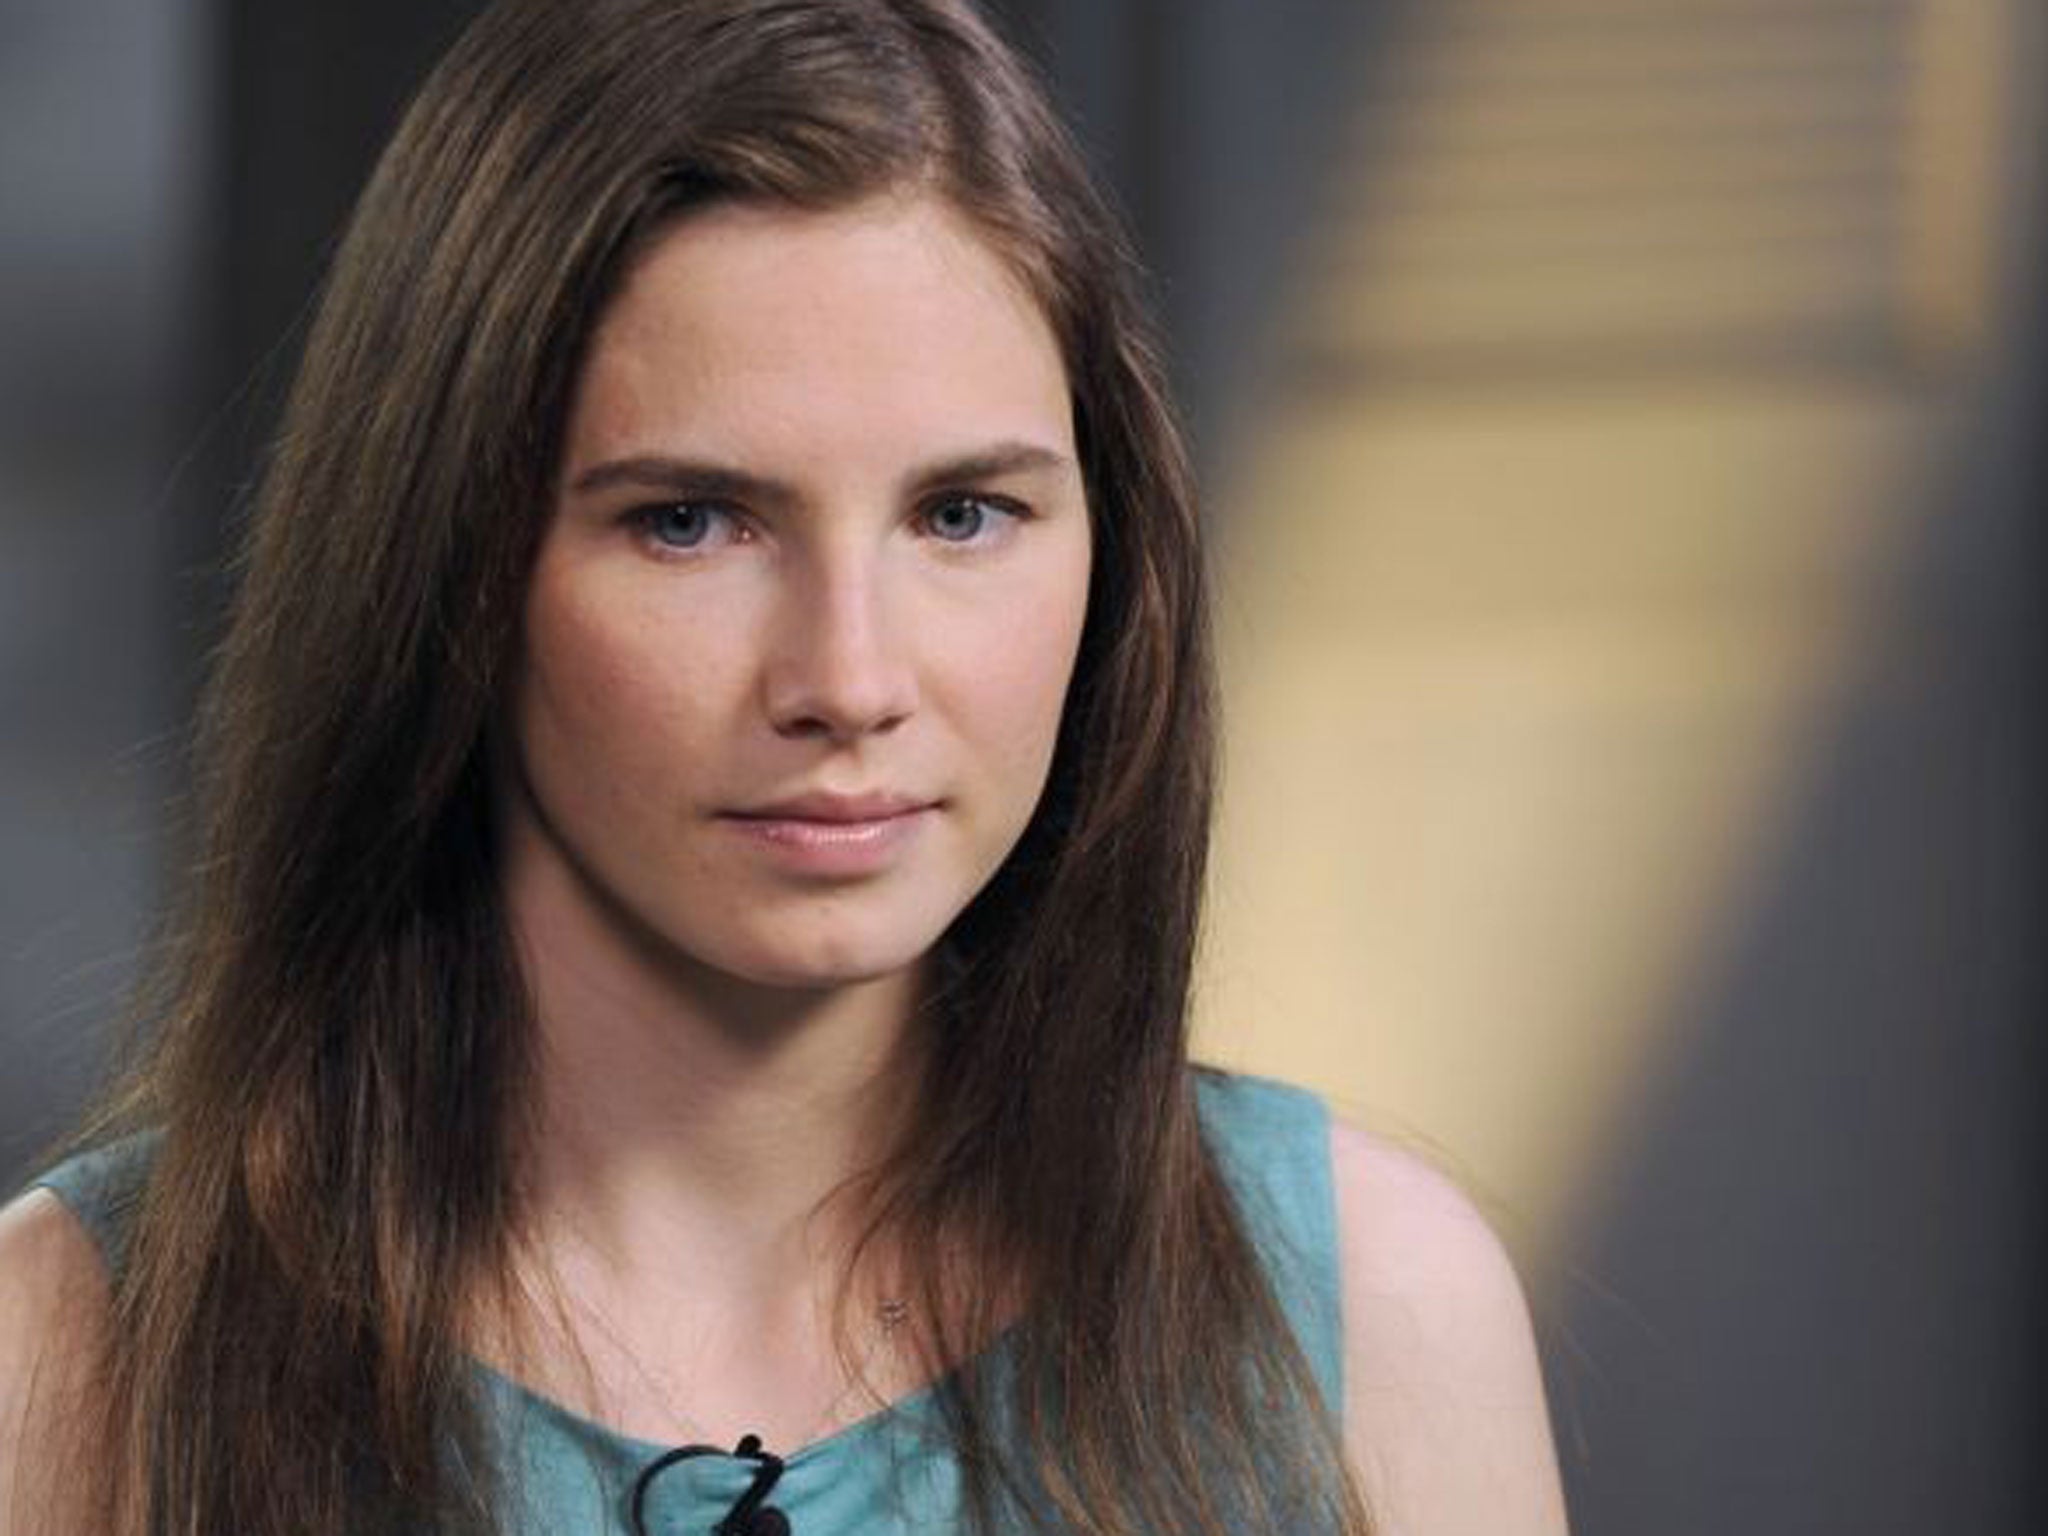 Amanda Knox has revealed that she wrote a letter intended to be sent to the family of murdered British student Meredith Kercher